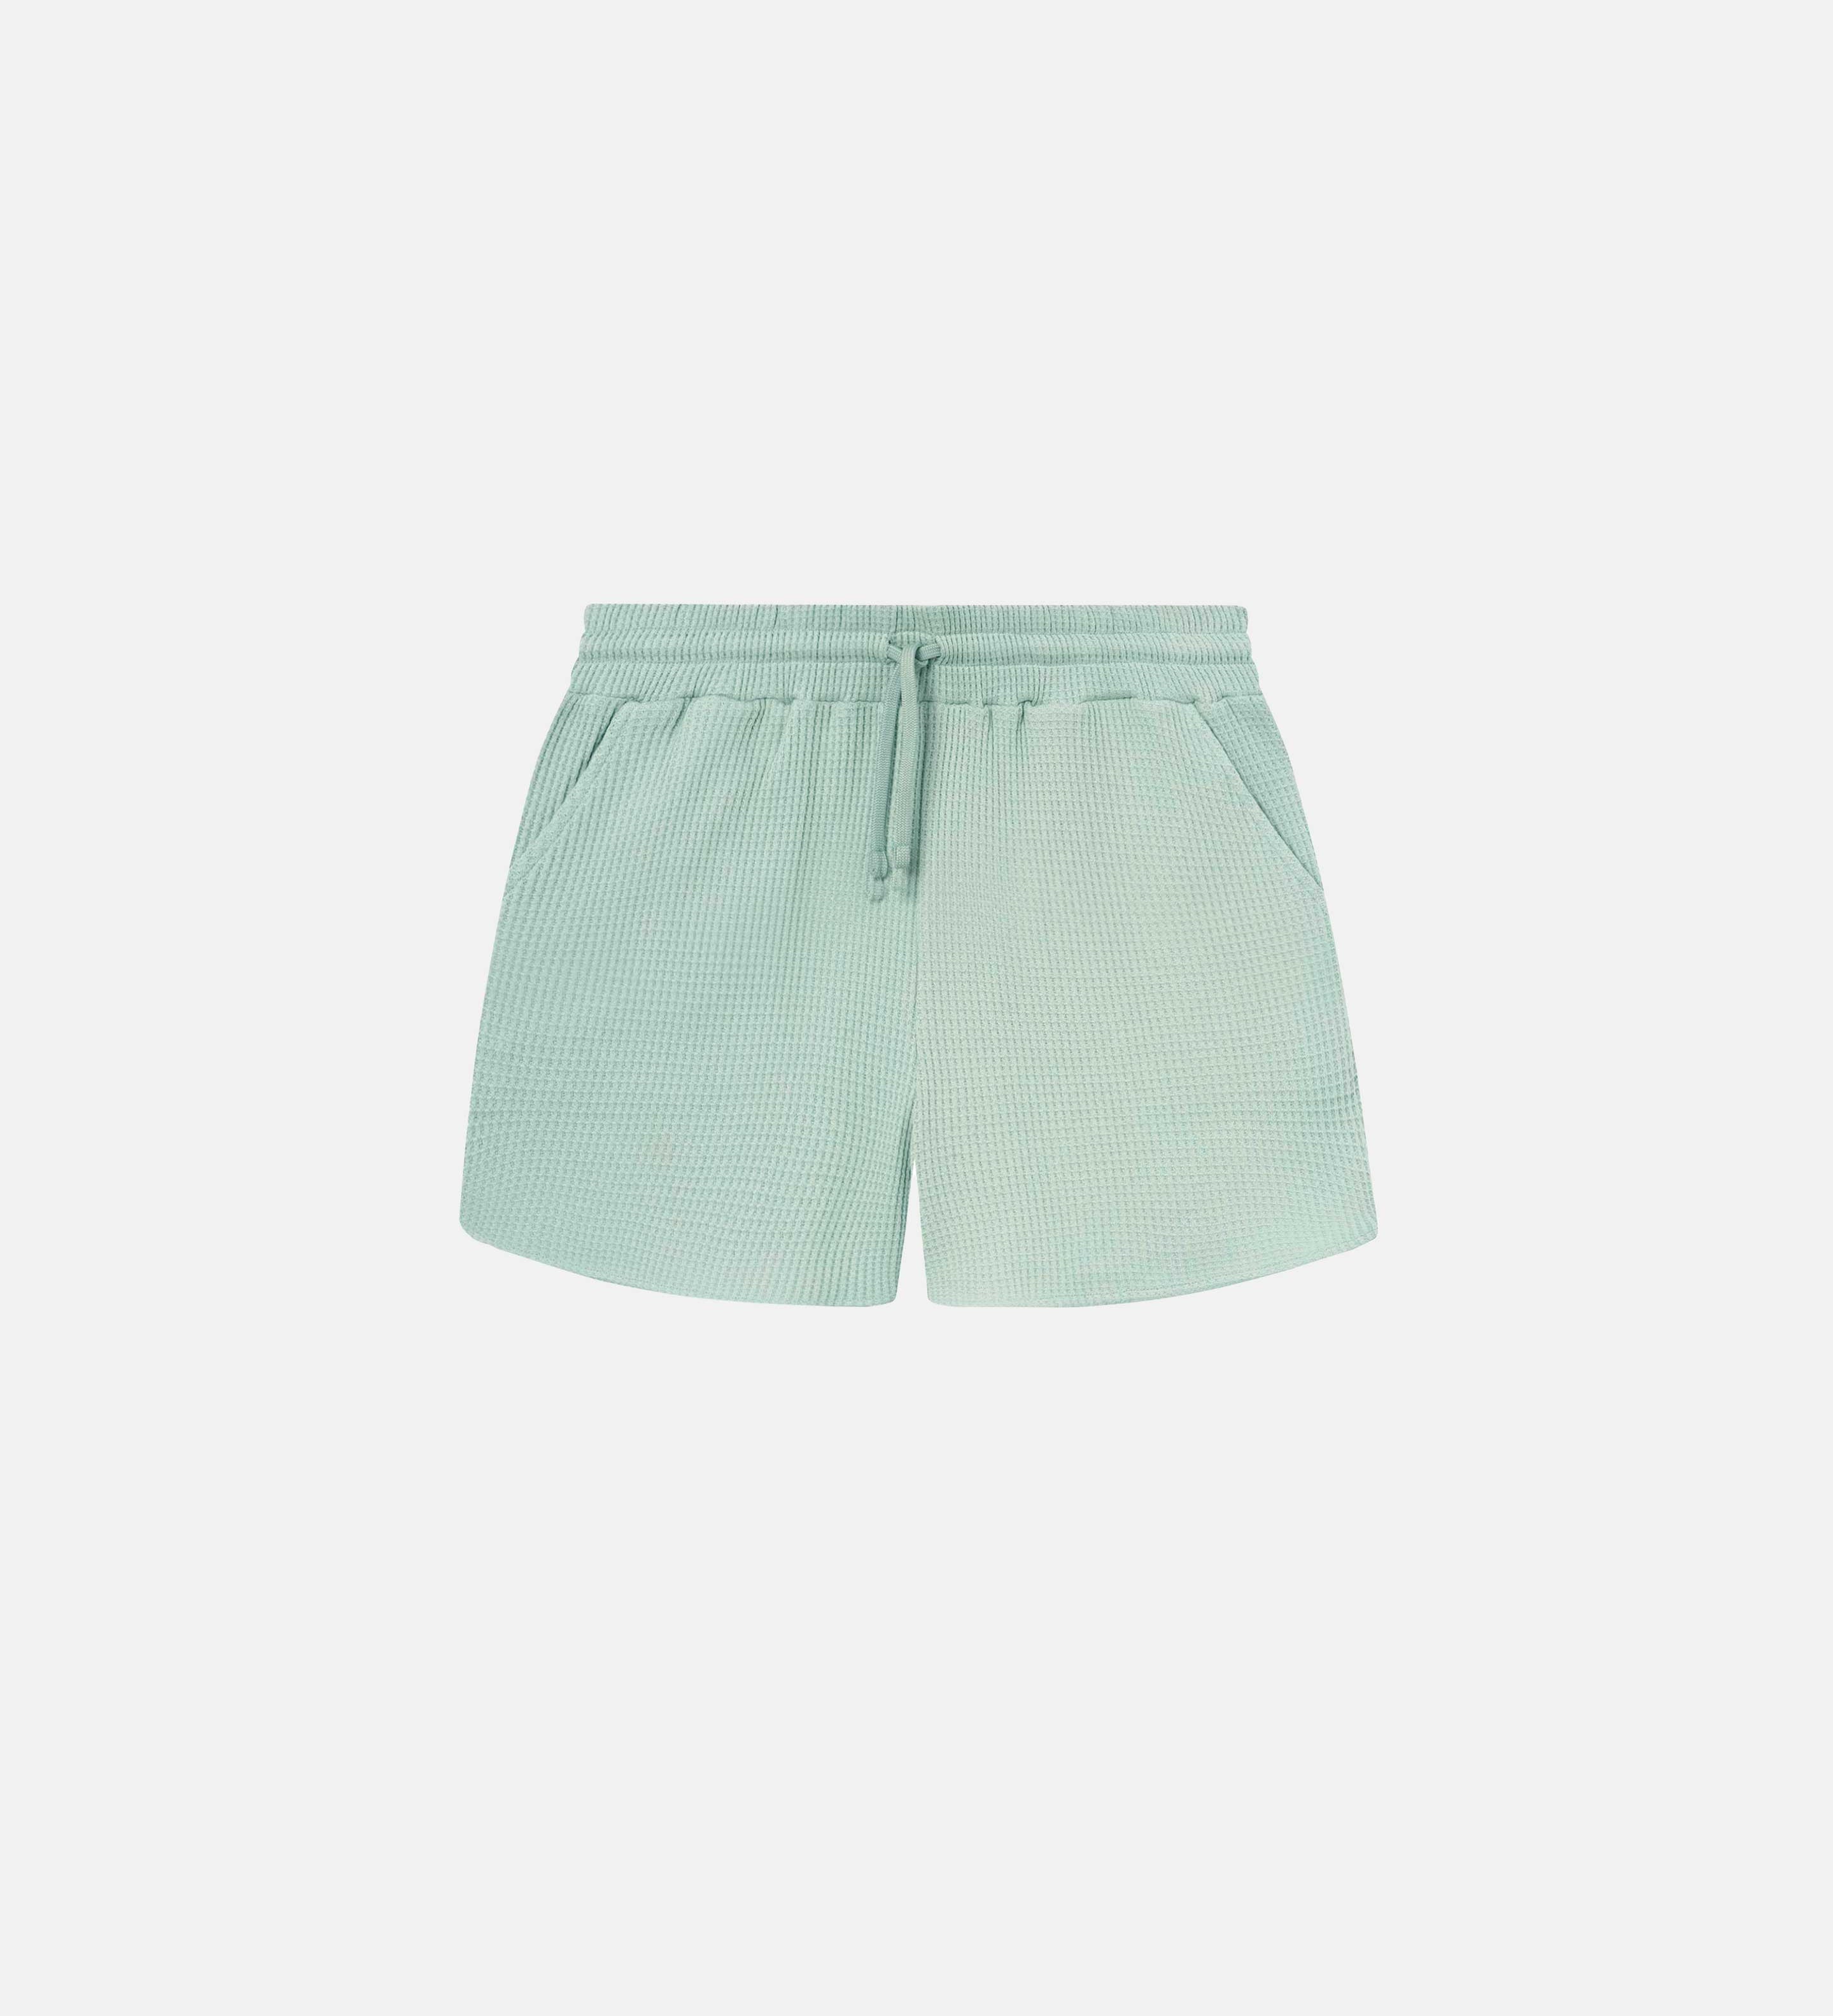 Mint green waffle-patterned short-length shorts with two front pockets and a drawstring.